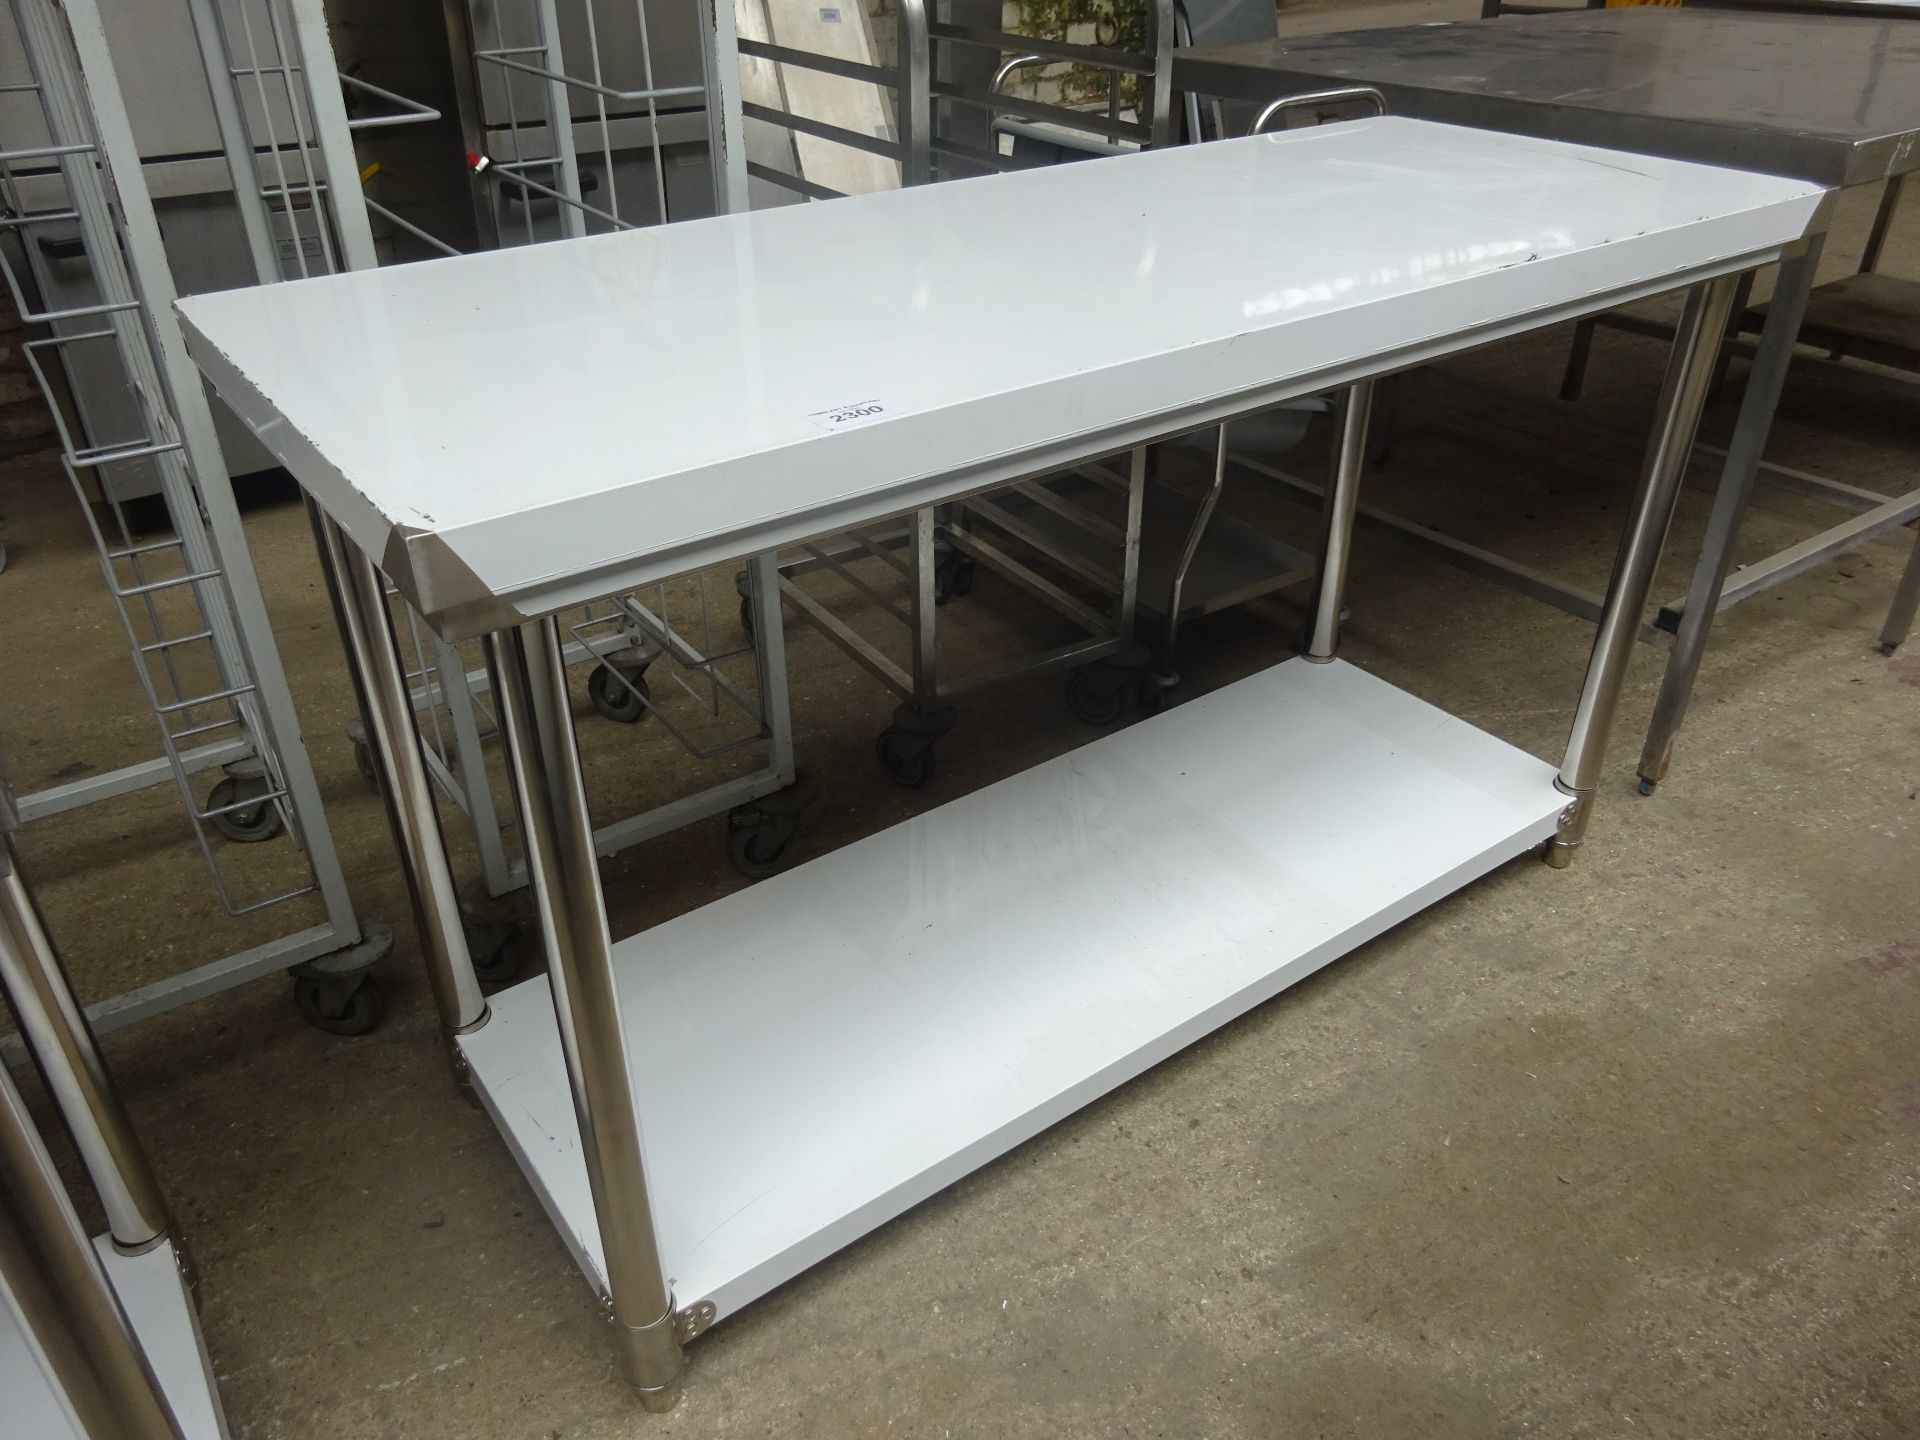 Stainless steel prep table with under shelf H:90cm, W:150cm, D:60cm